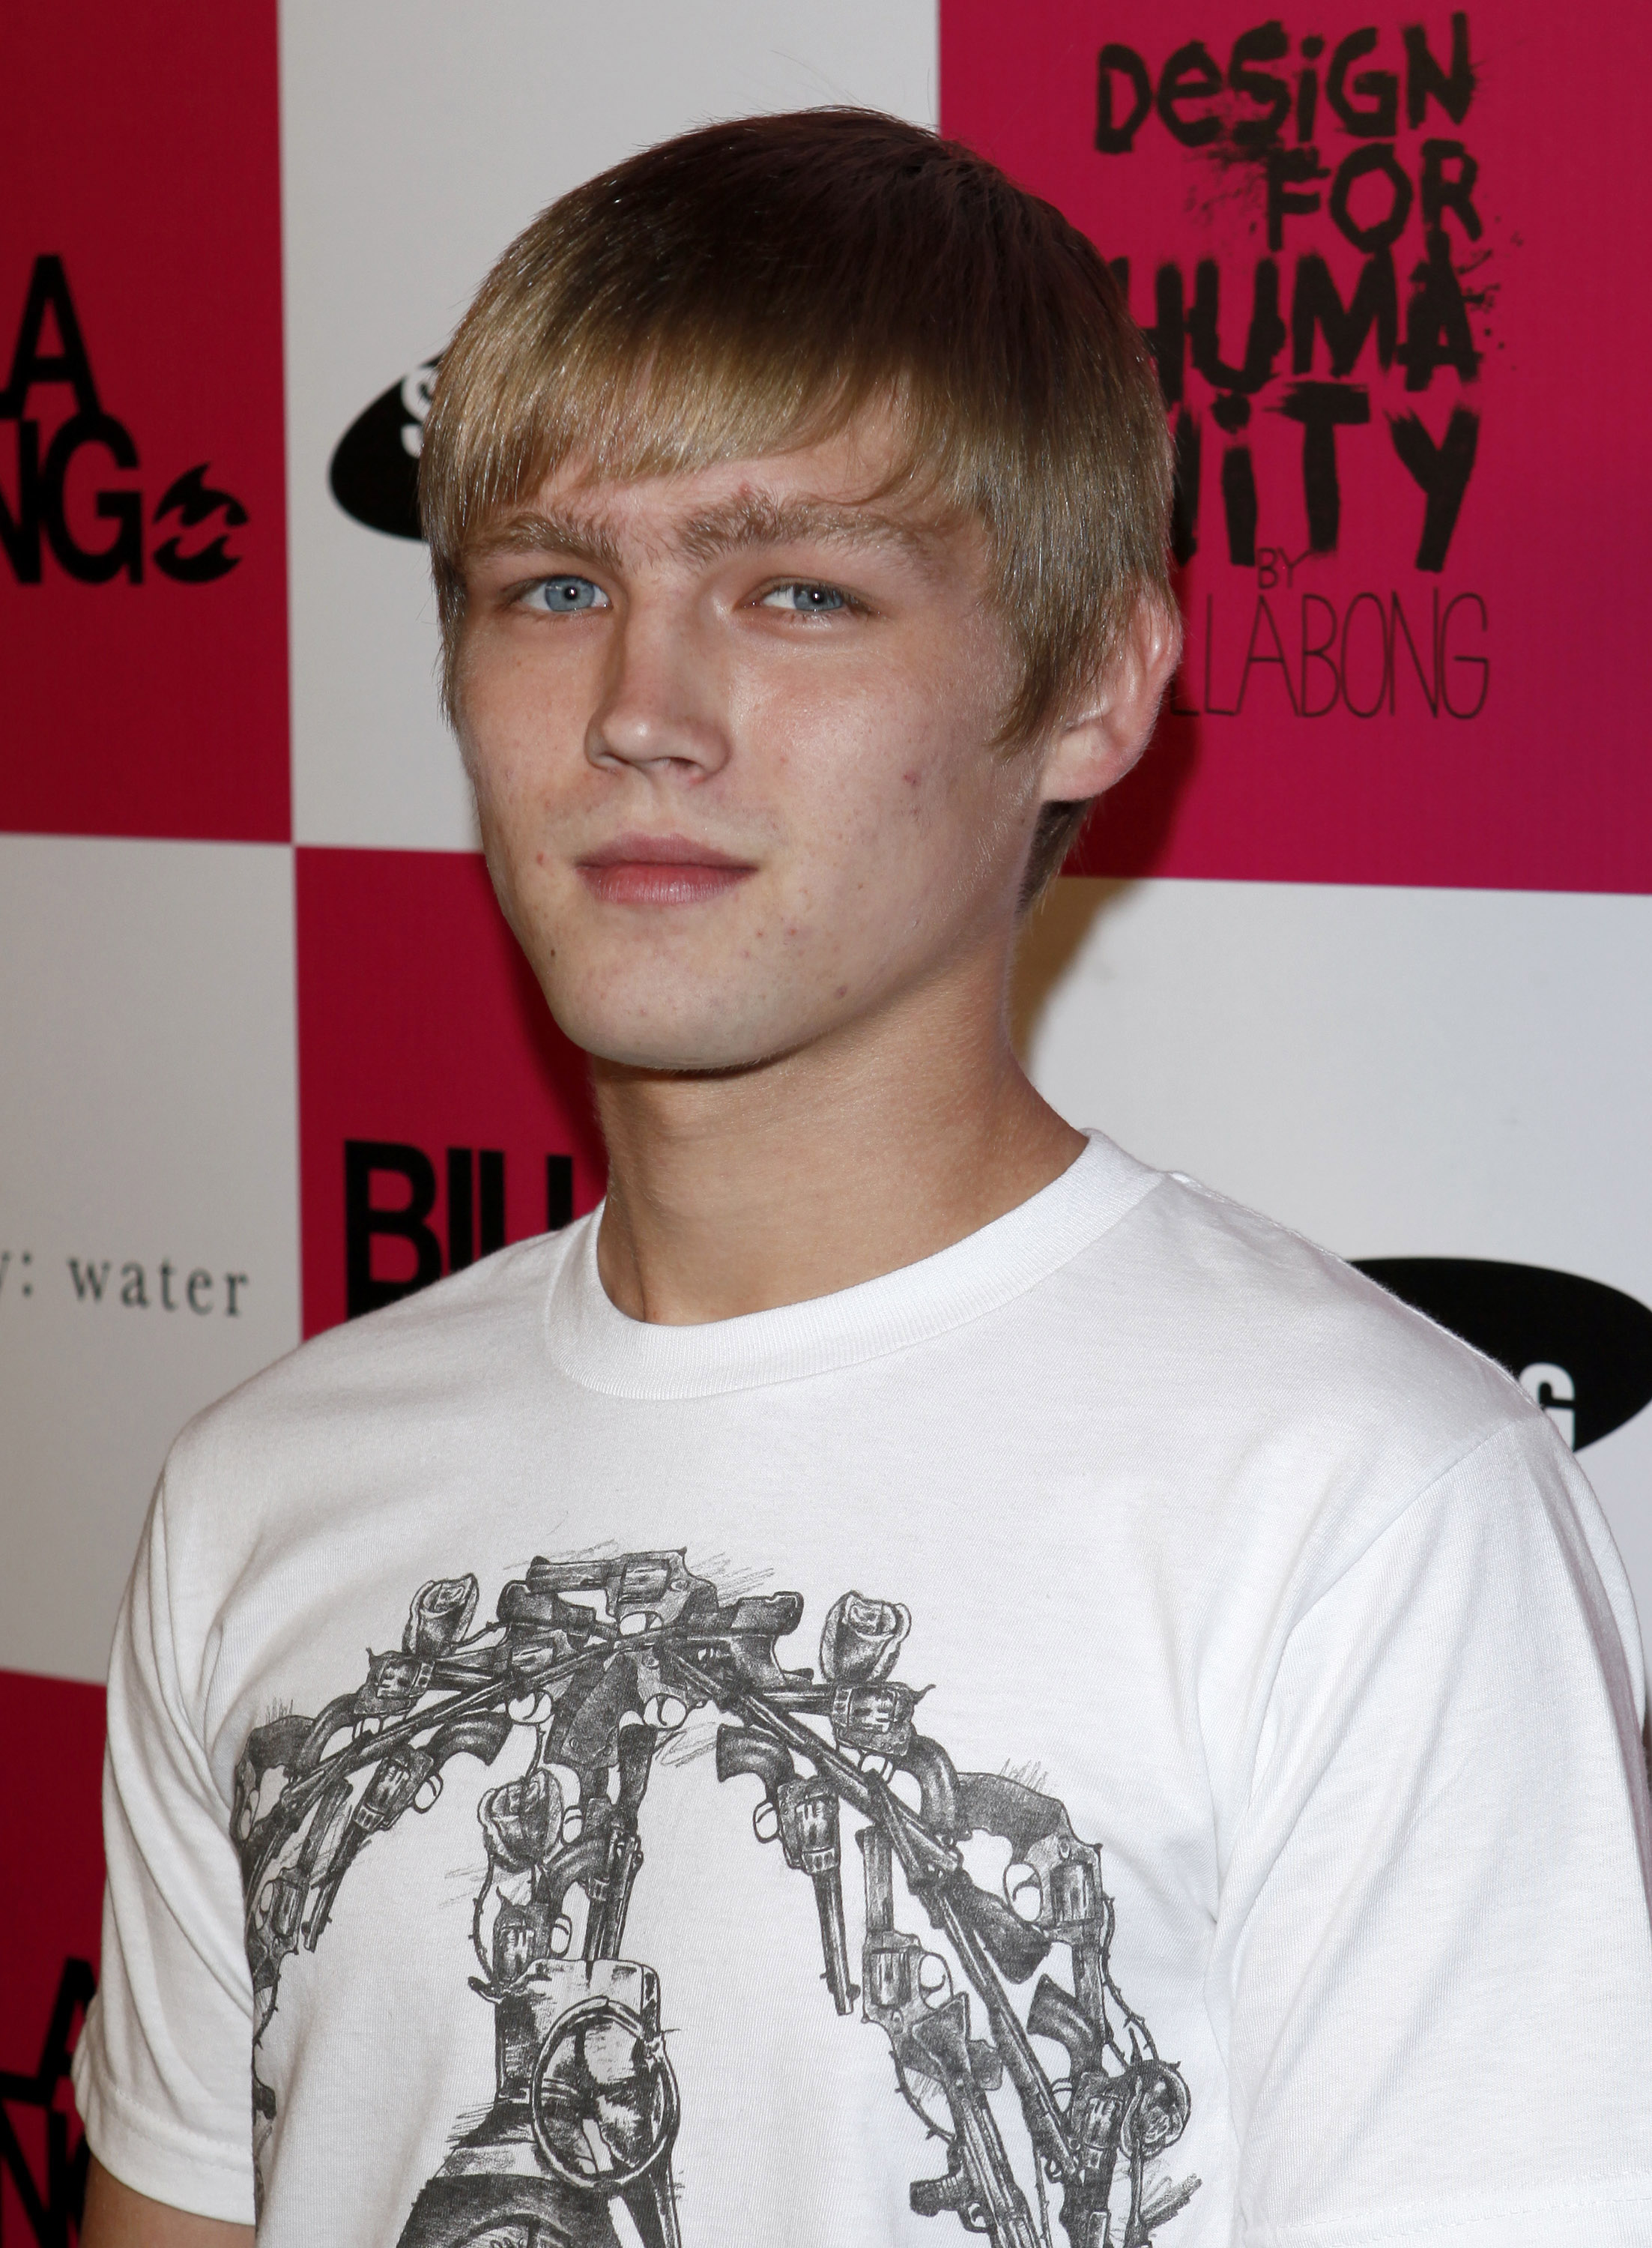 Evan Ellingson at the 3rd Annual "Billabong Design for Humanity" Event in Hollywood, California on June 17, 2009. | Source: Getty Images